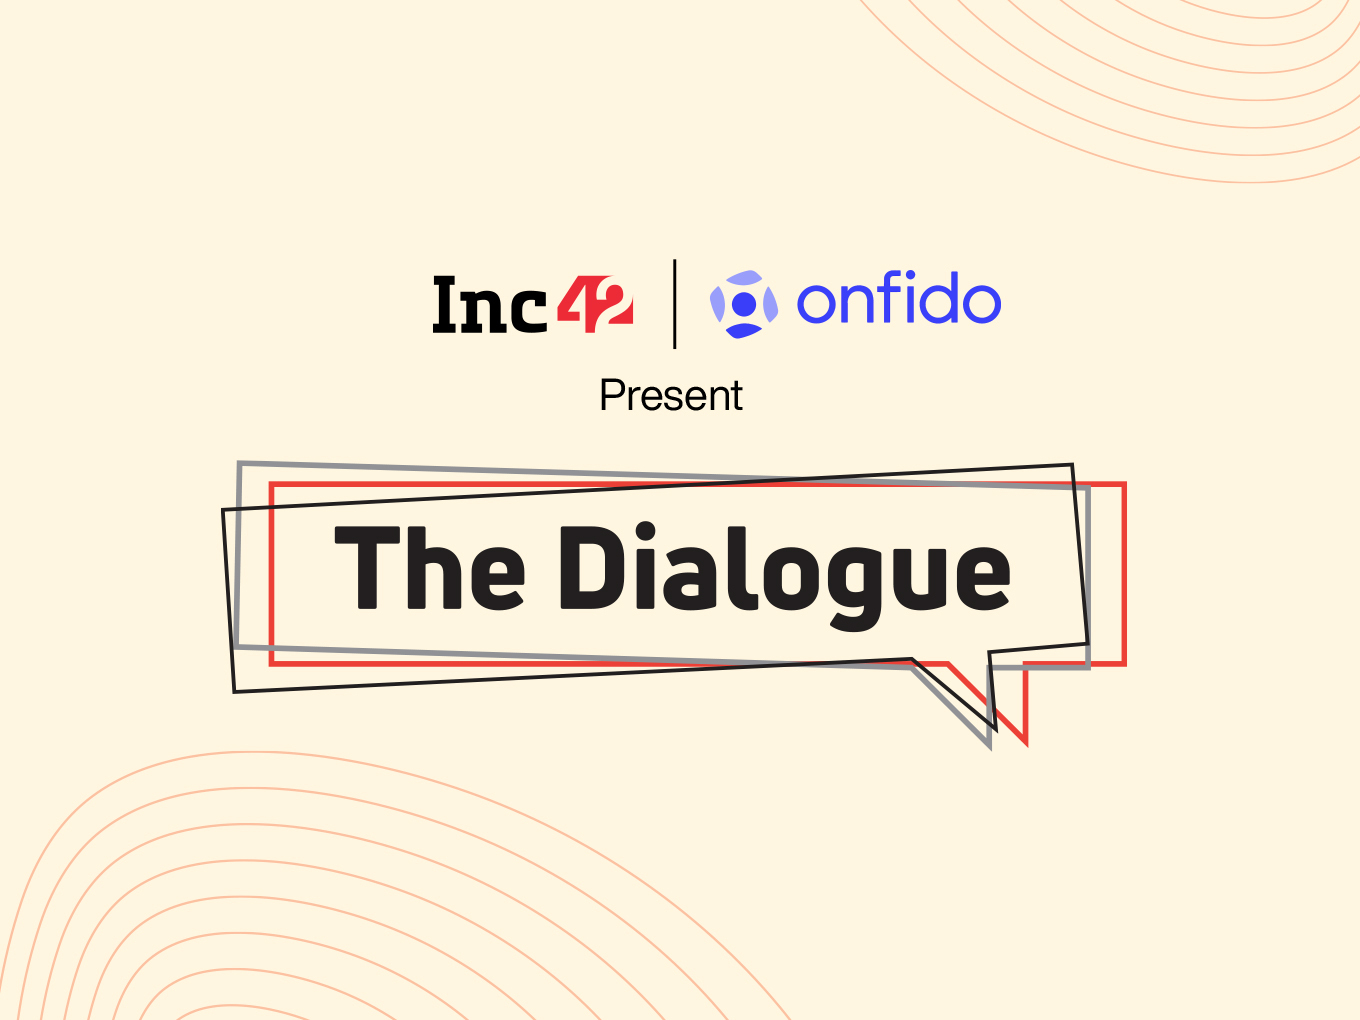 The Dialogue By Inc42 And Onfido I In Focus: Fintech, Gaming And Transport Tech